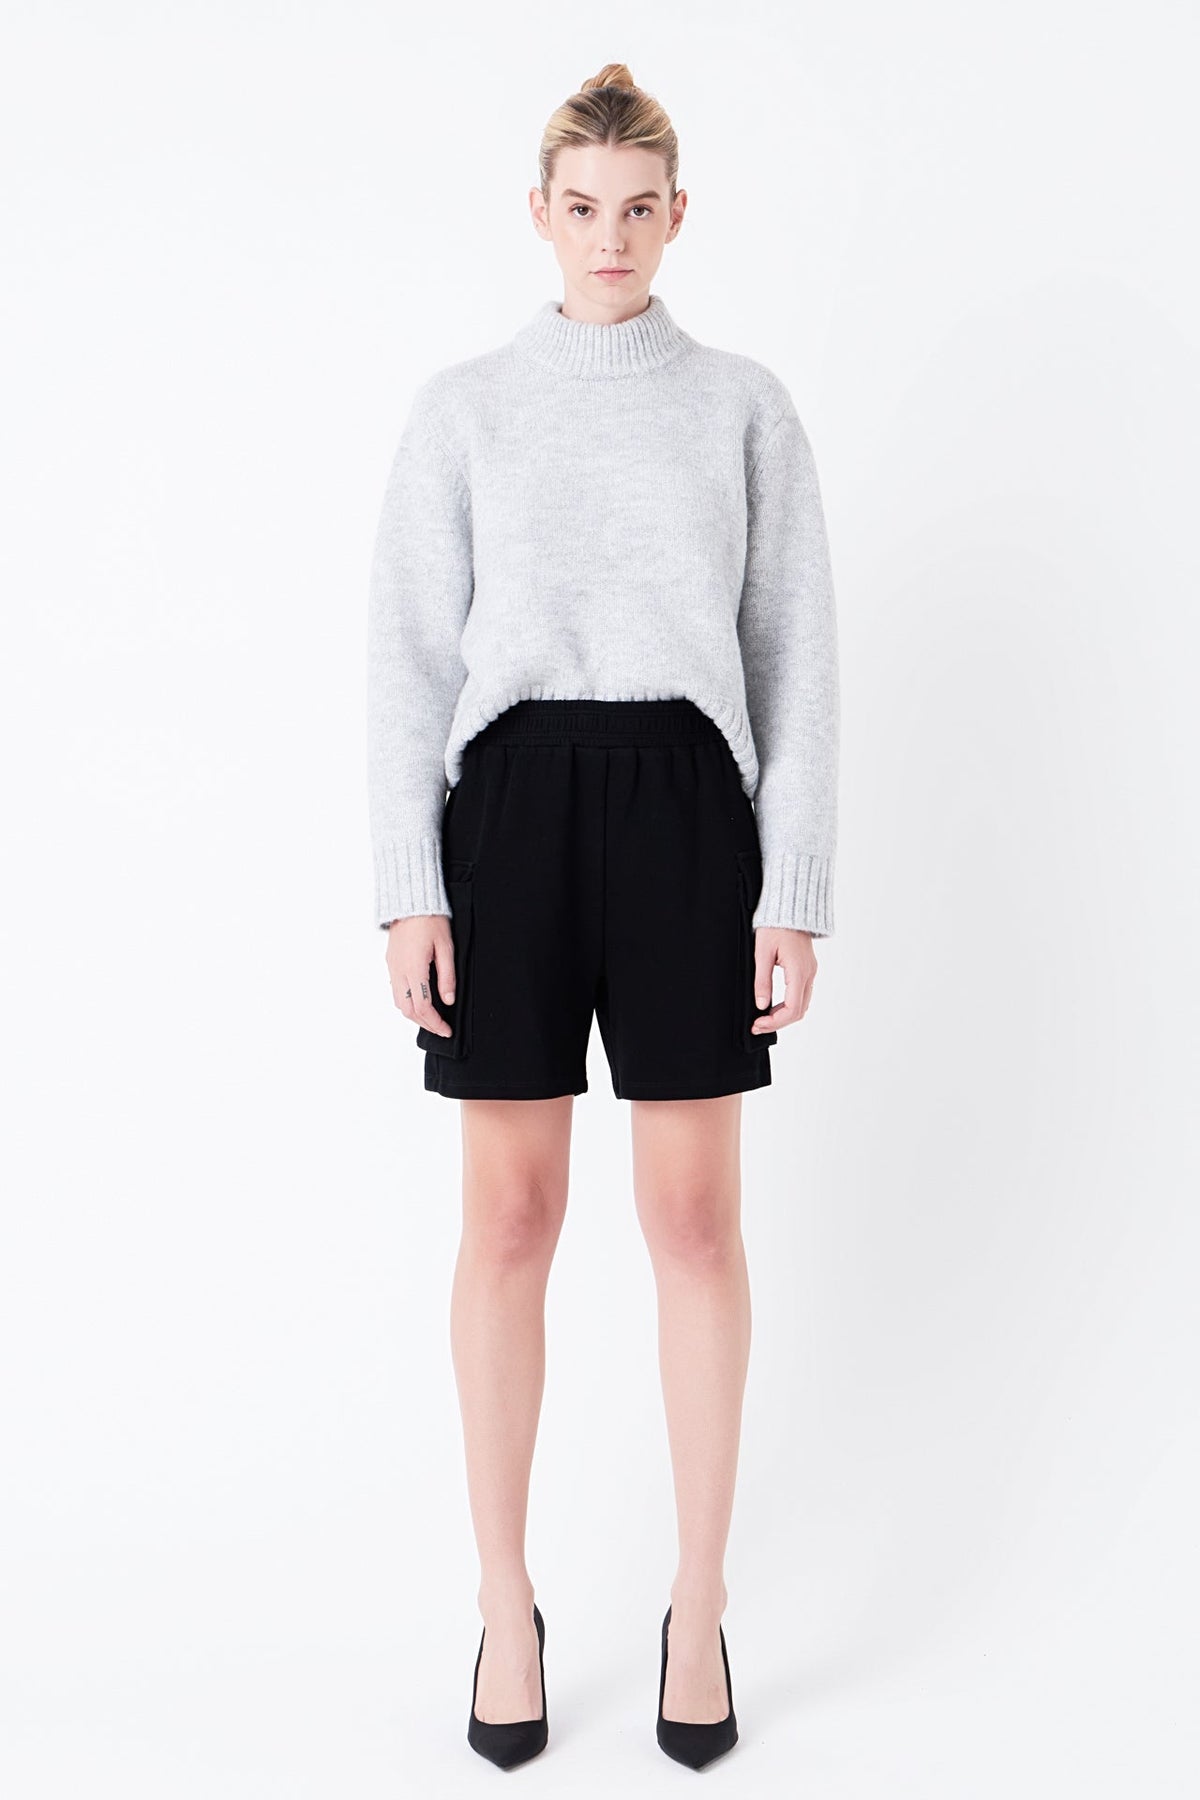 GREY LAB - Knit Shorts with Pockets - PANTS available at Objectrare